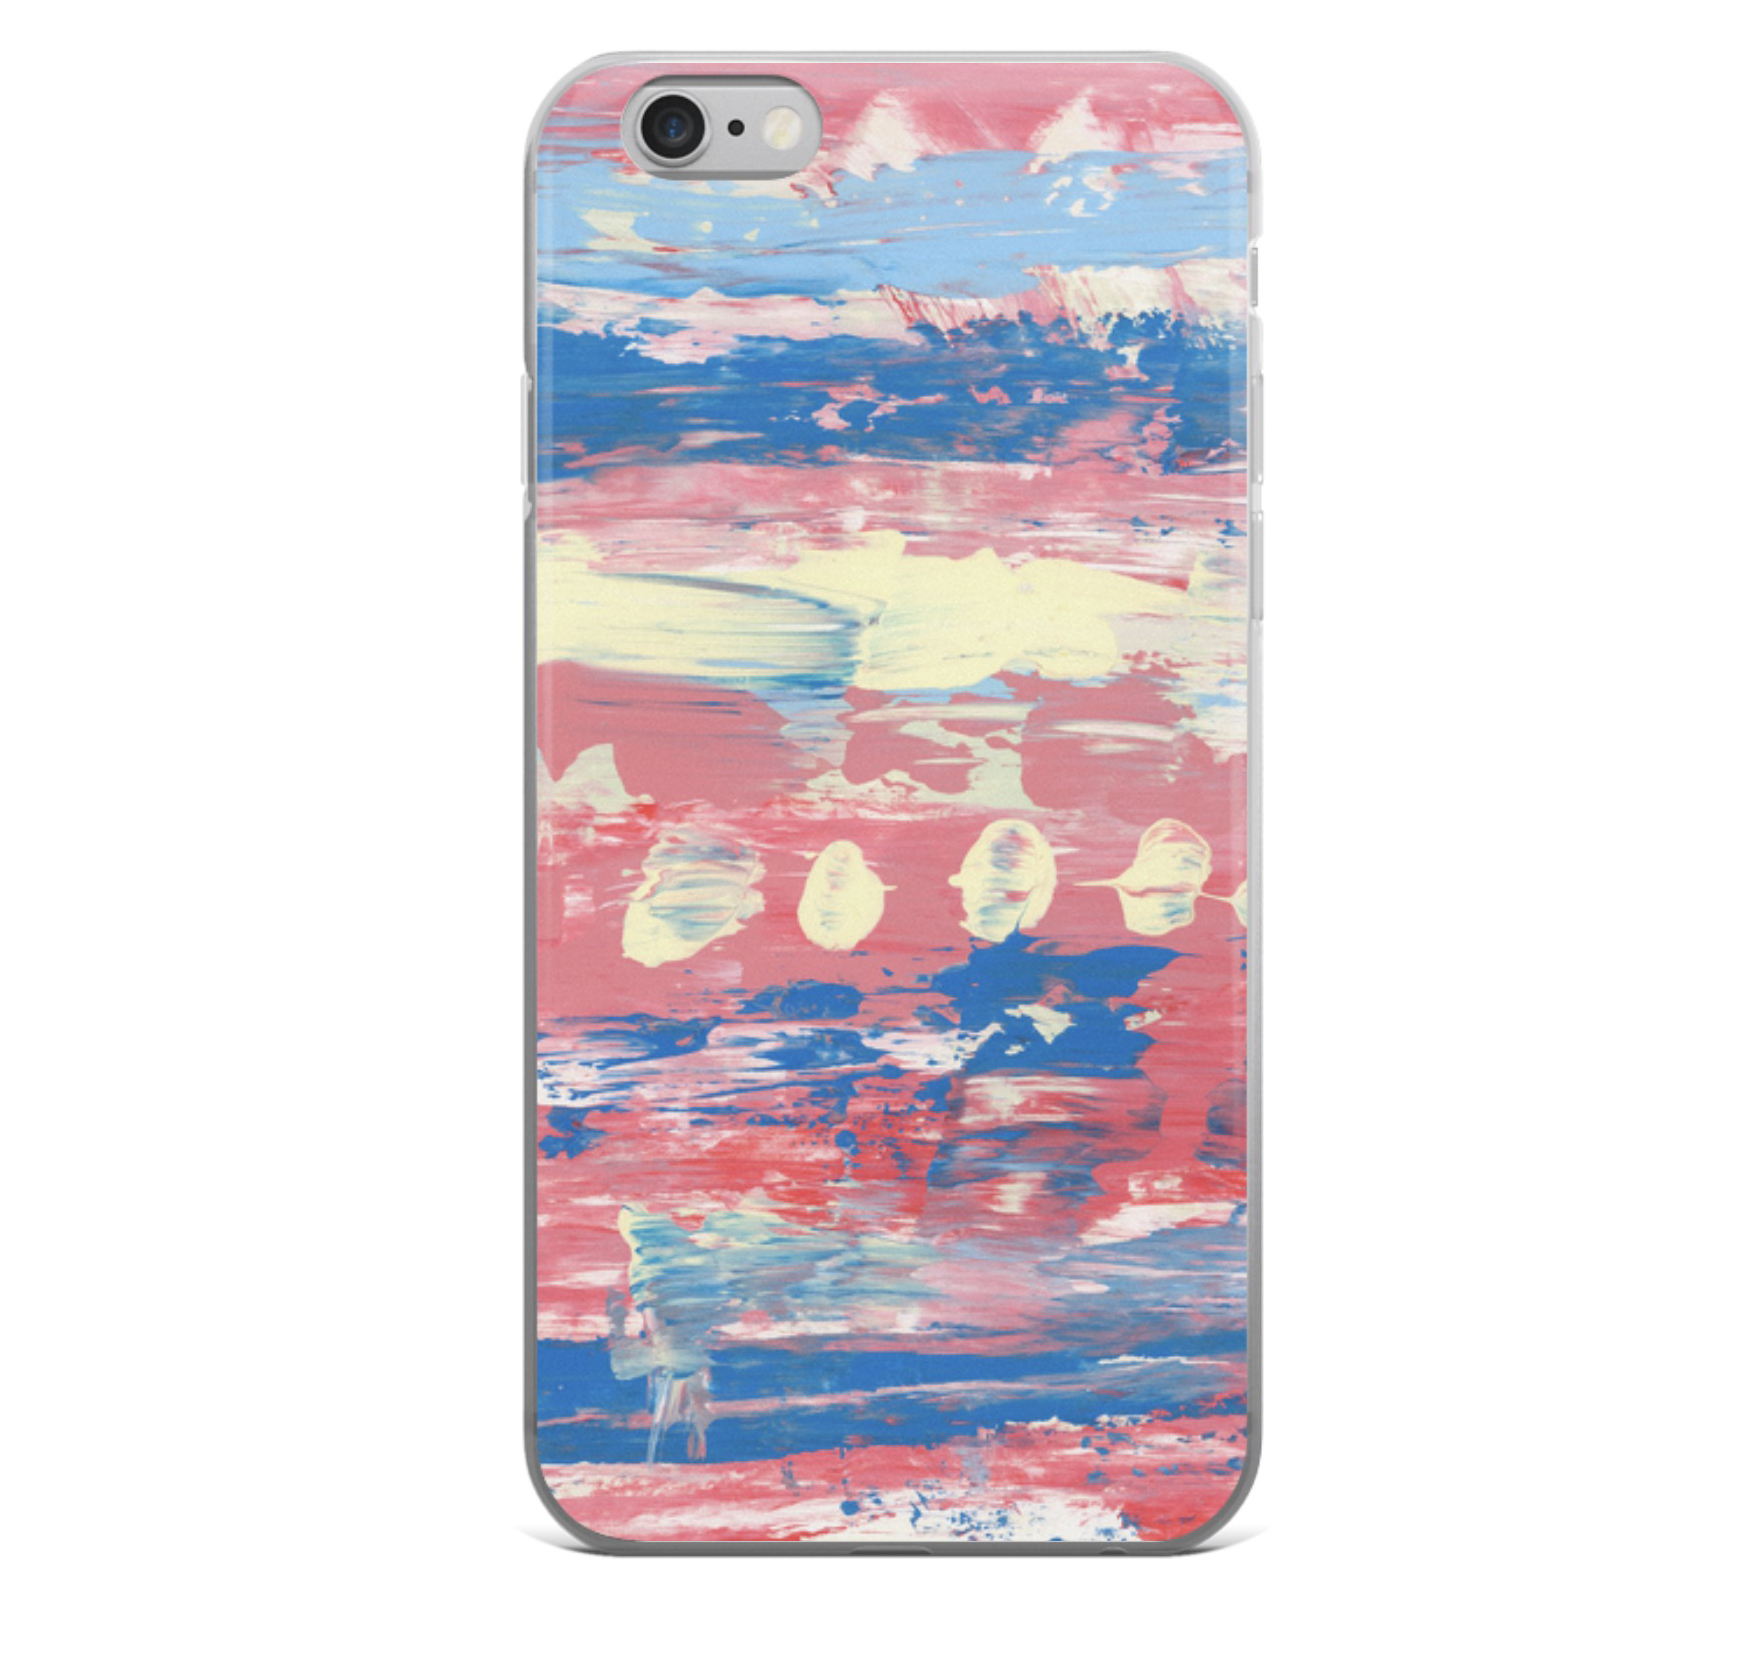 iphone case with pastel colors